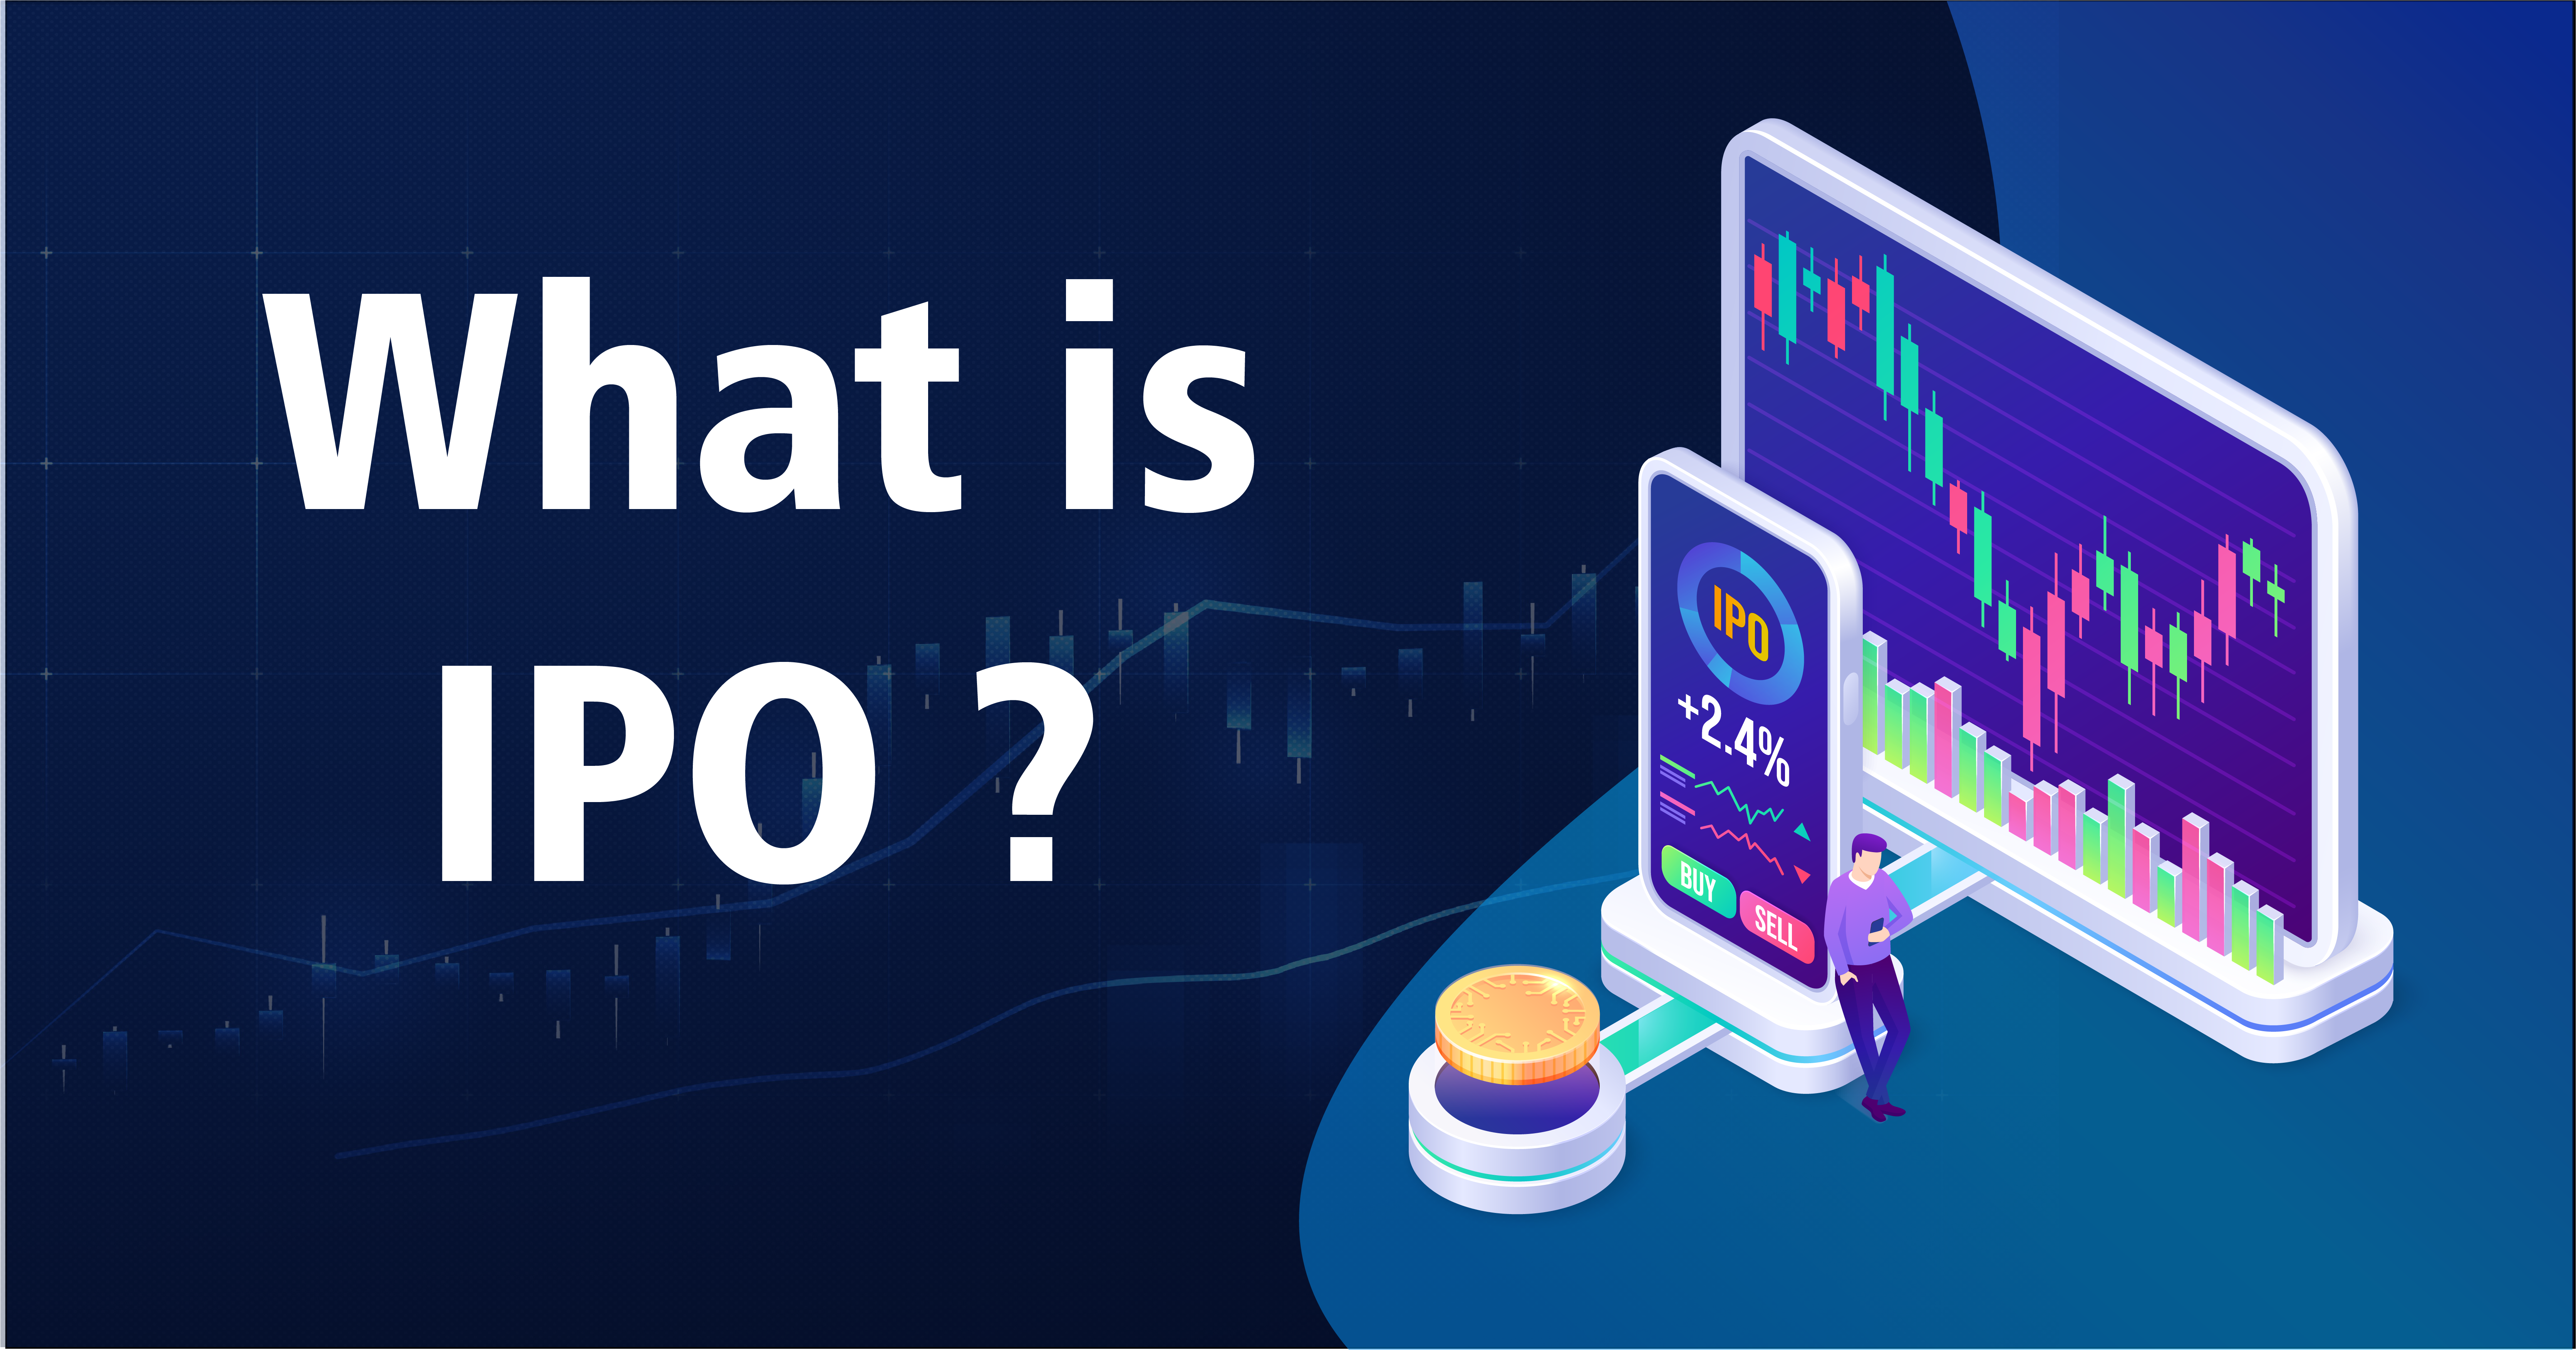 What is the Full Form of IPO?